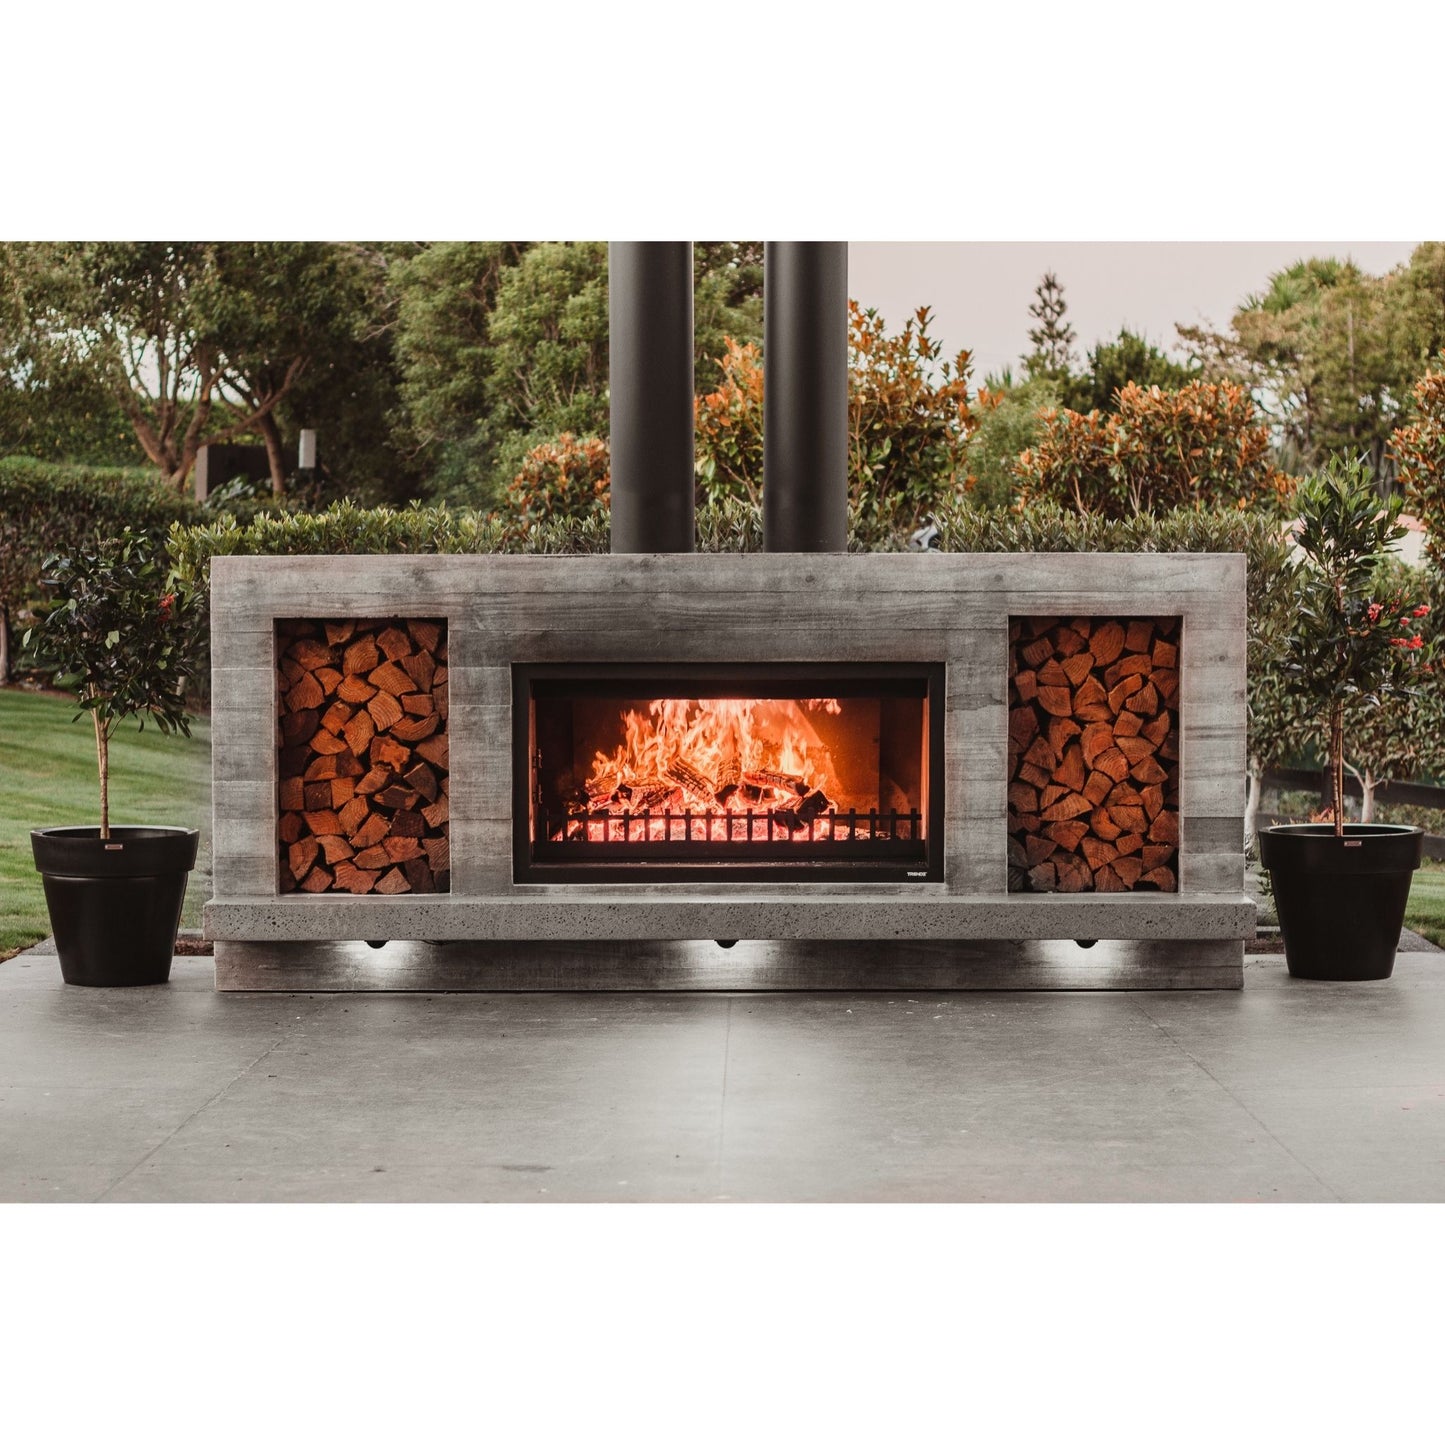 Large black Modscene planters by an outdoor fireplace. The fireplace is a Trendz Outdoors fireplace.